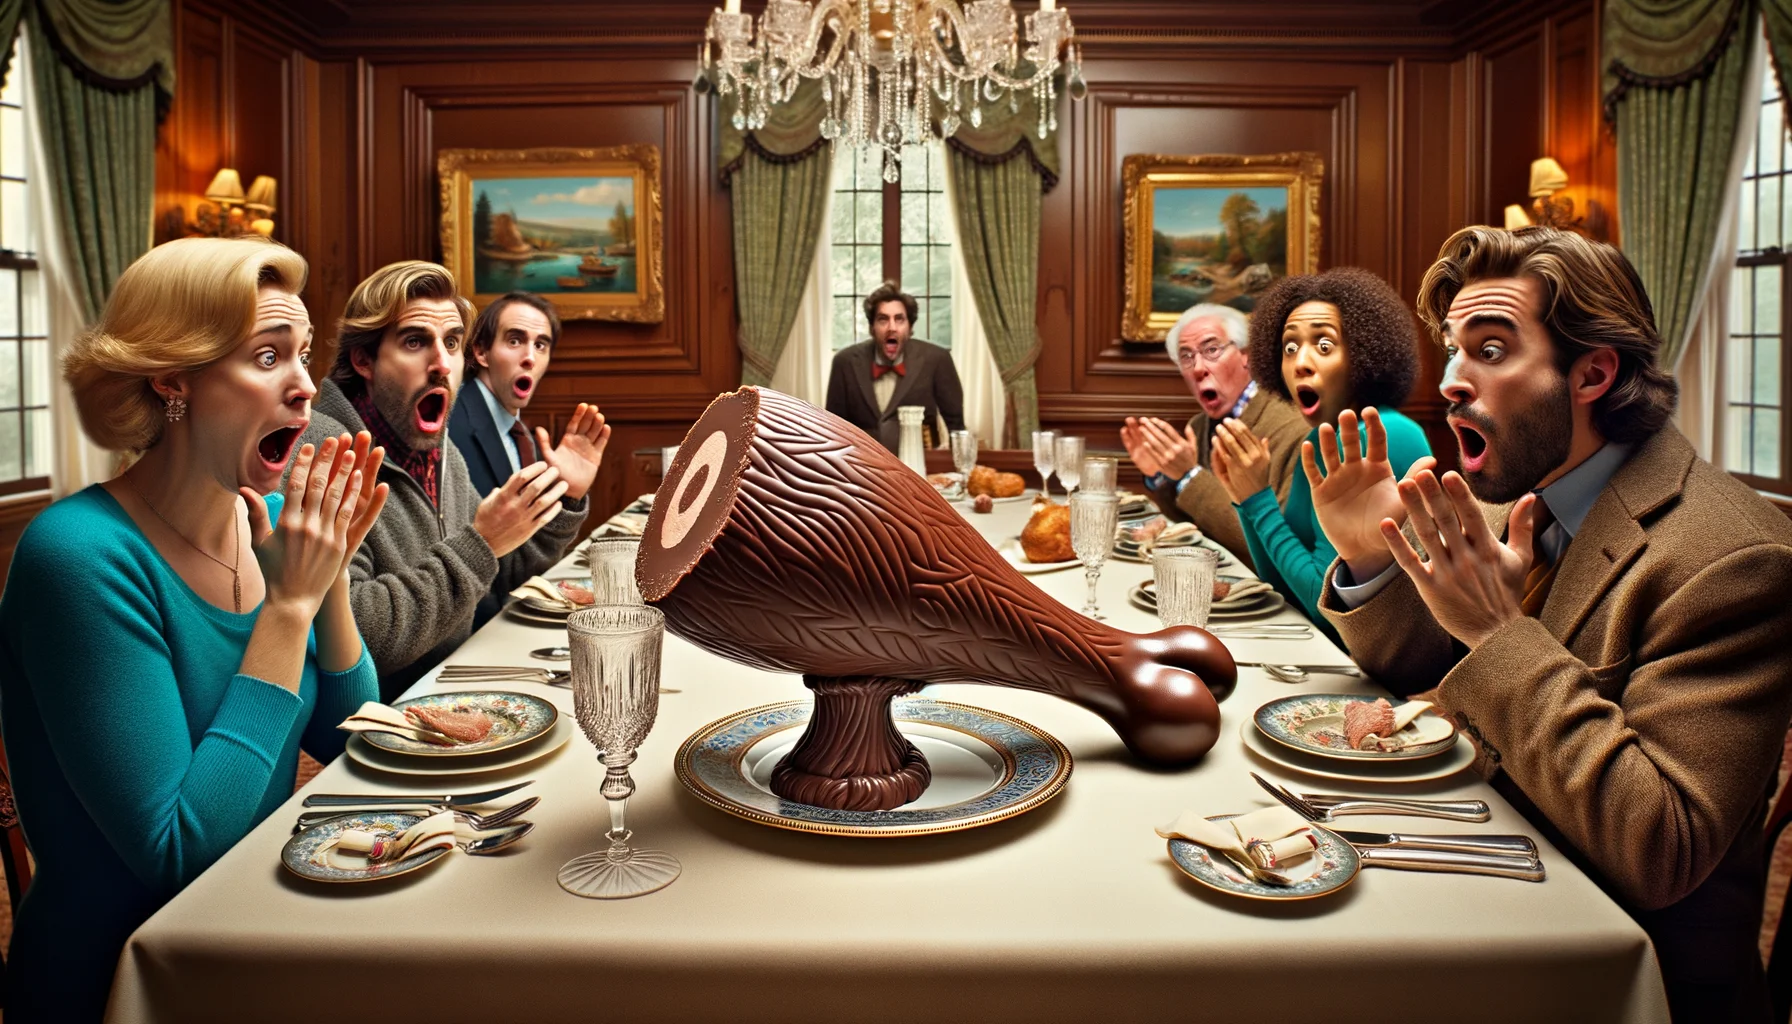 Imagine a humorous, realistic scene of a Swiss Gourmet Chocolate Turkey Leg. This is no ordinary turkey leg, but one intricately crafted from the finest Swiss chocolate. It's placed in an ideal scenario - on a sumptuous dining table set with luxurious silk tablecloth, silverware, and shining crystal glassware, in an elegant and well-lit dining room with classic wooden furnishings. Across the table, guests express surprise and amusement at the unique dessert, their eyes widening with incredulity and delight. The scenario is filled with light-hearted laughter and astonished expressions.